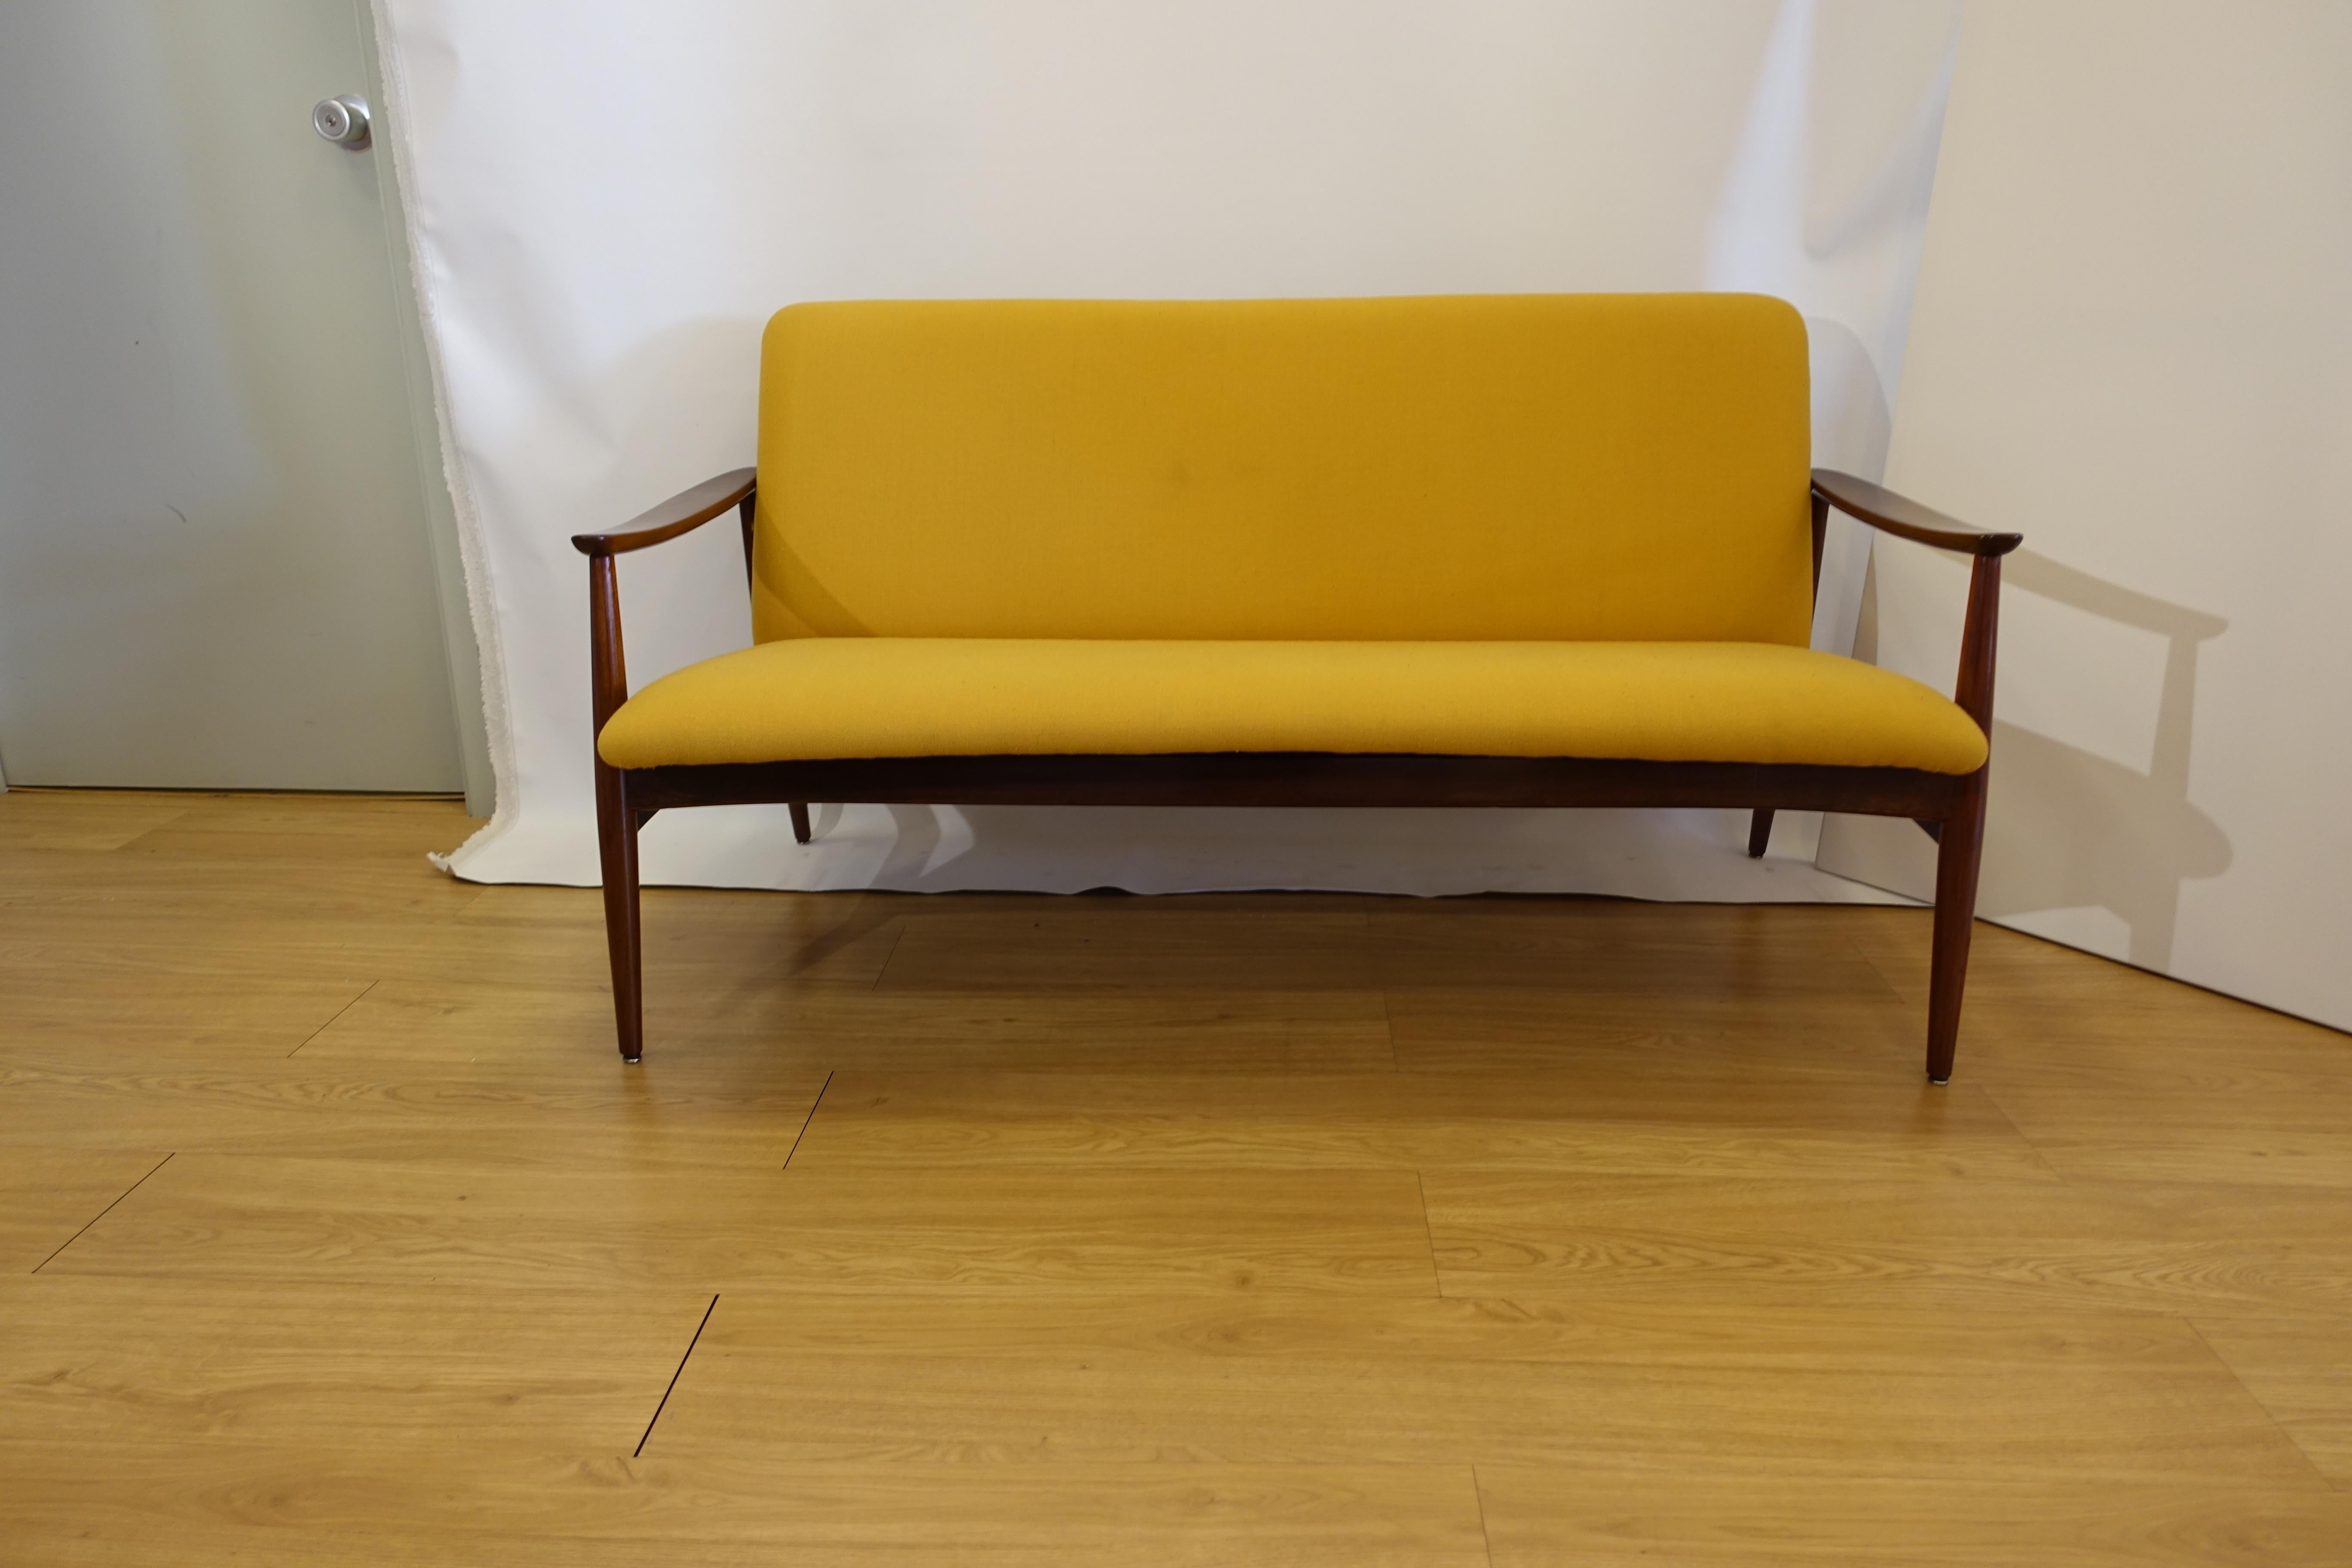 Olaio 67 was the first collapsible sofa produced by Móveis Olaio. Keeping the functional, would come to culminate, in 1967, with presentation of 